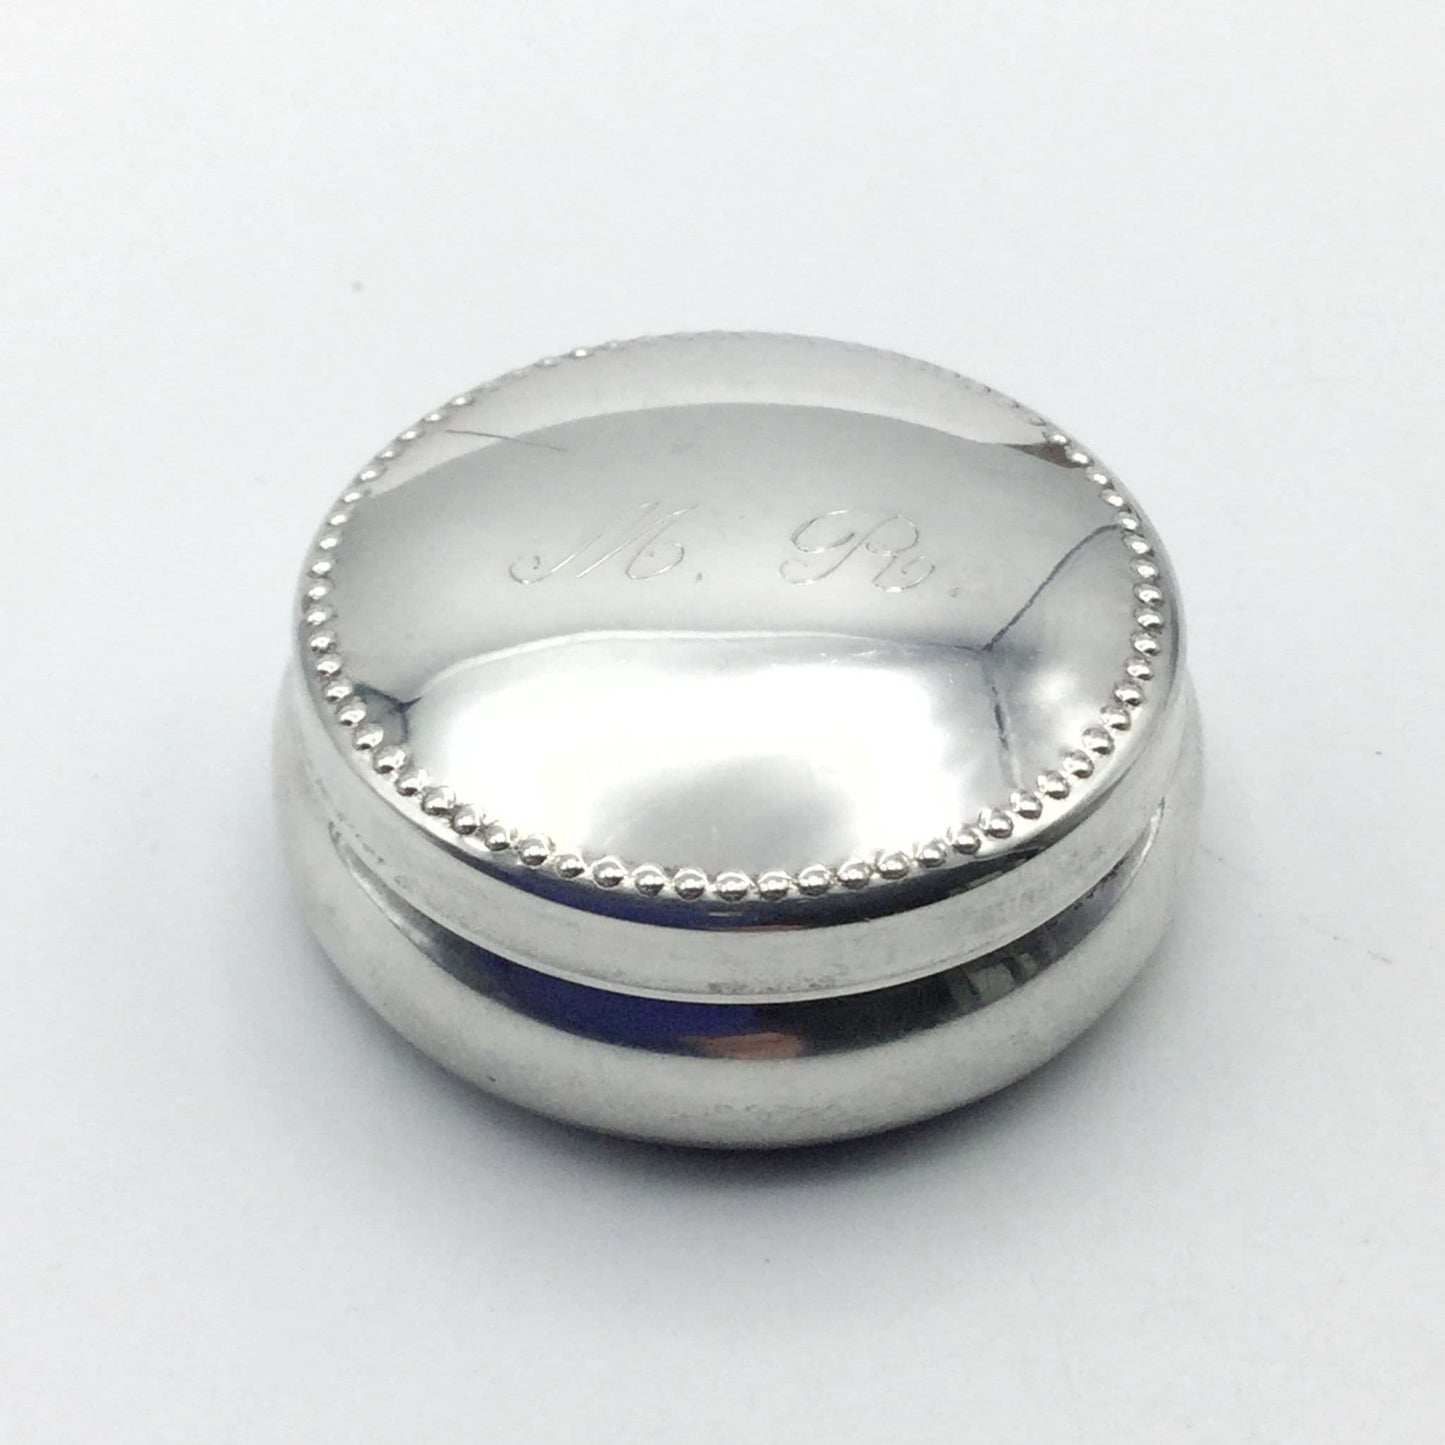 Round silver case with a dotted pattern around the lid and MR engraved in the centre on a white backgorund